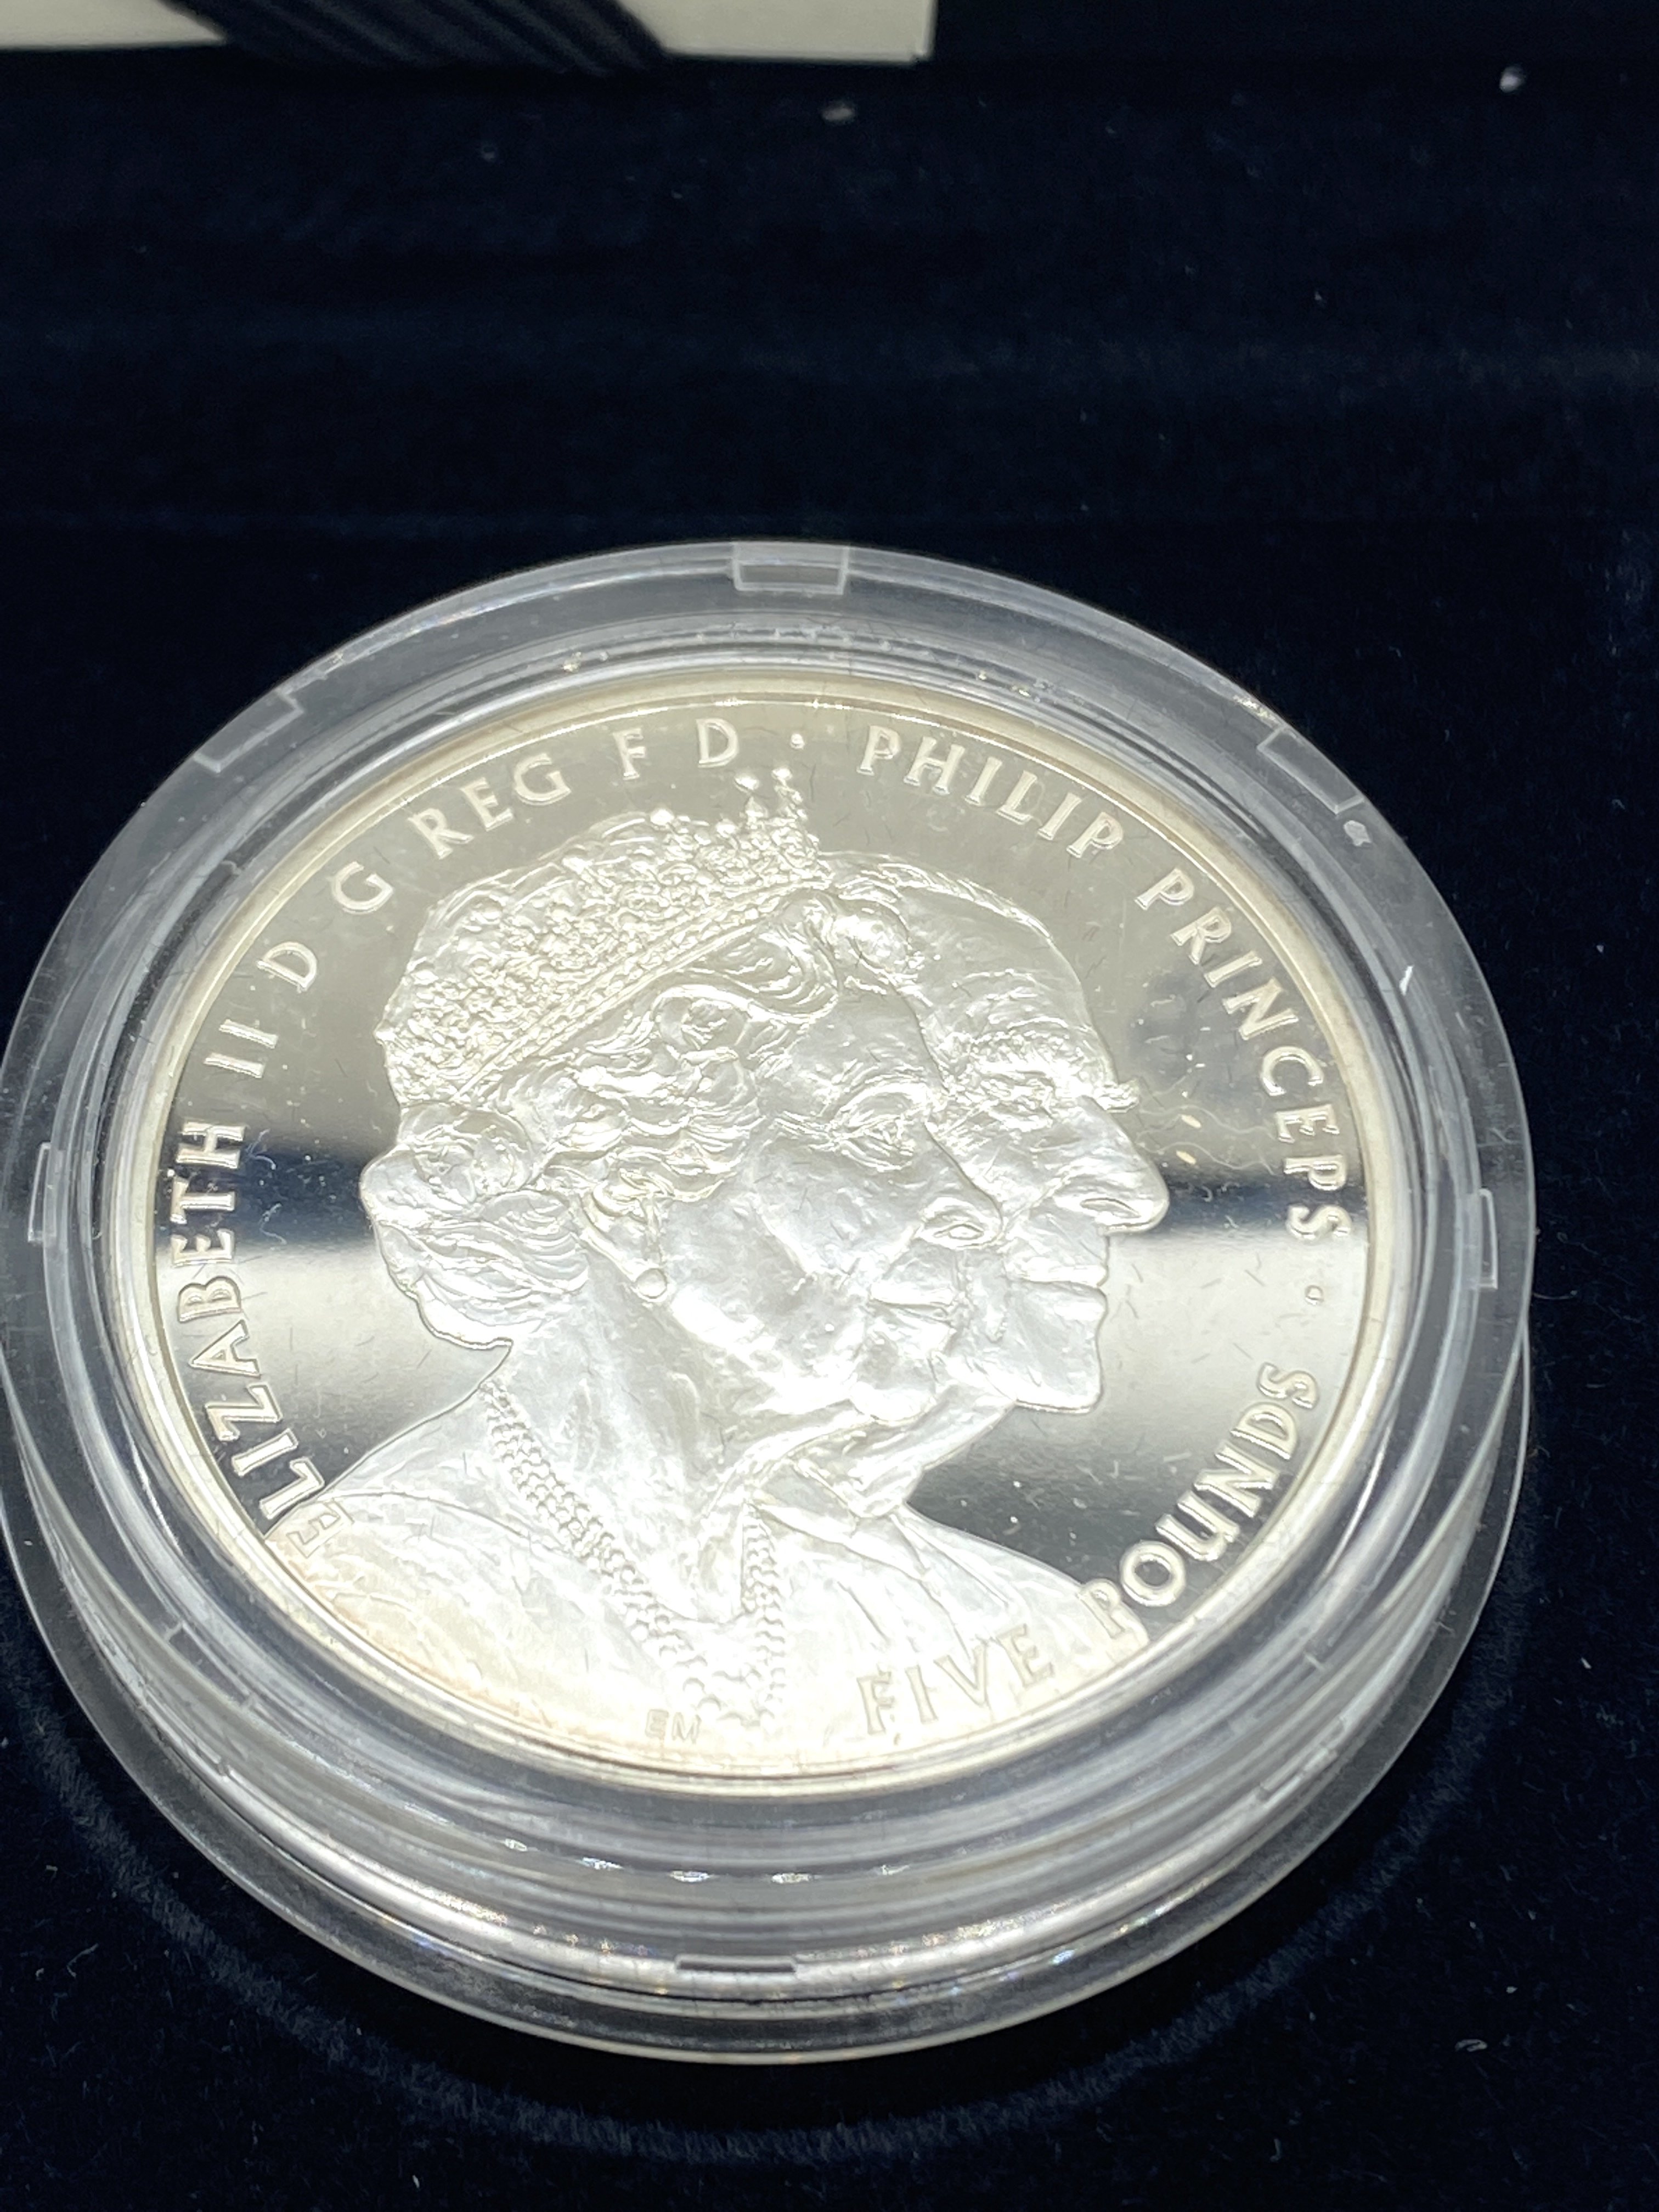 Platinum Wedding Anniversary 2017 £5 silver proof coin - Image 2 of 2